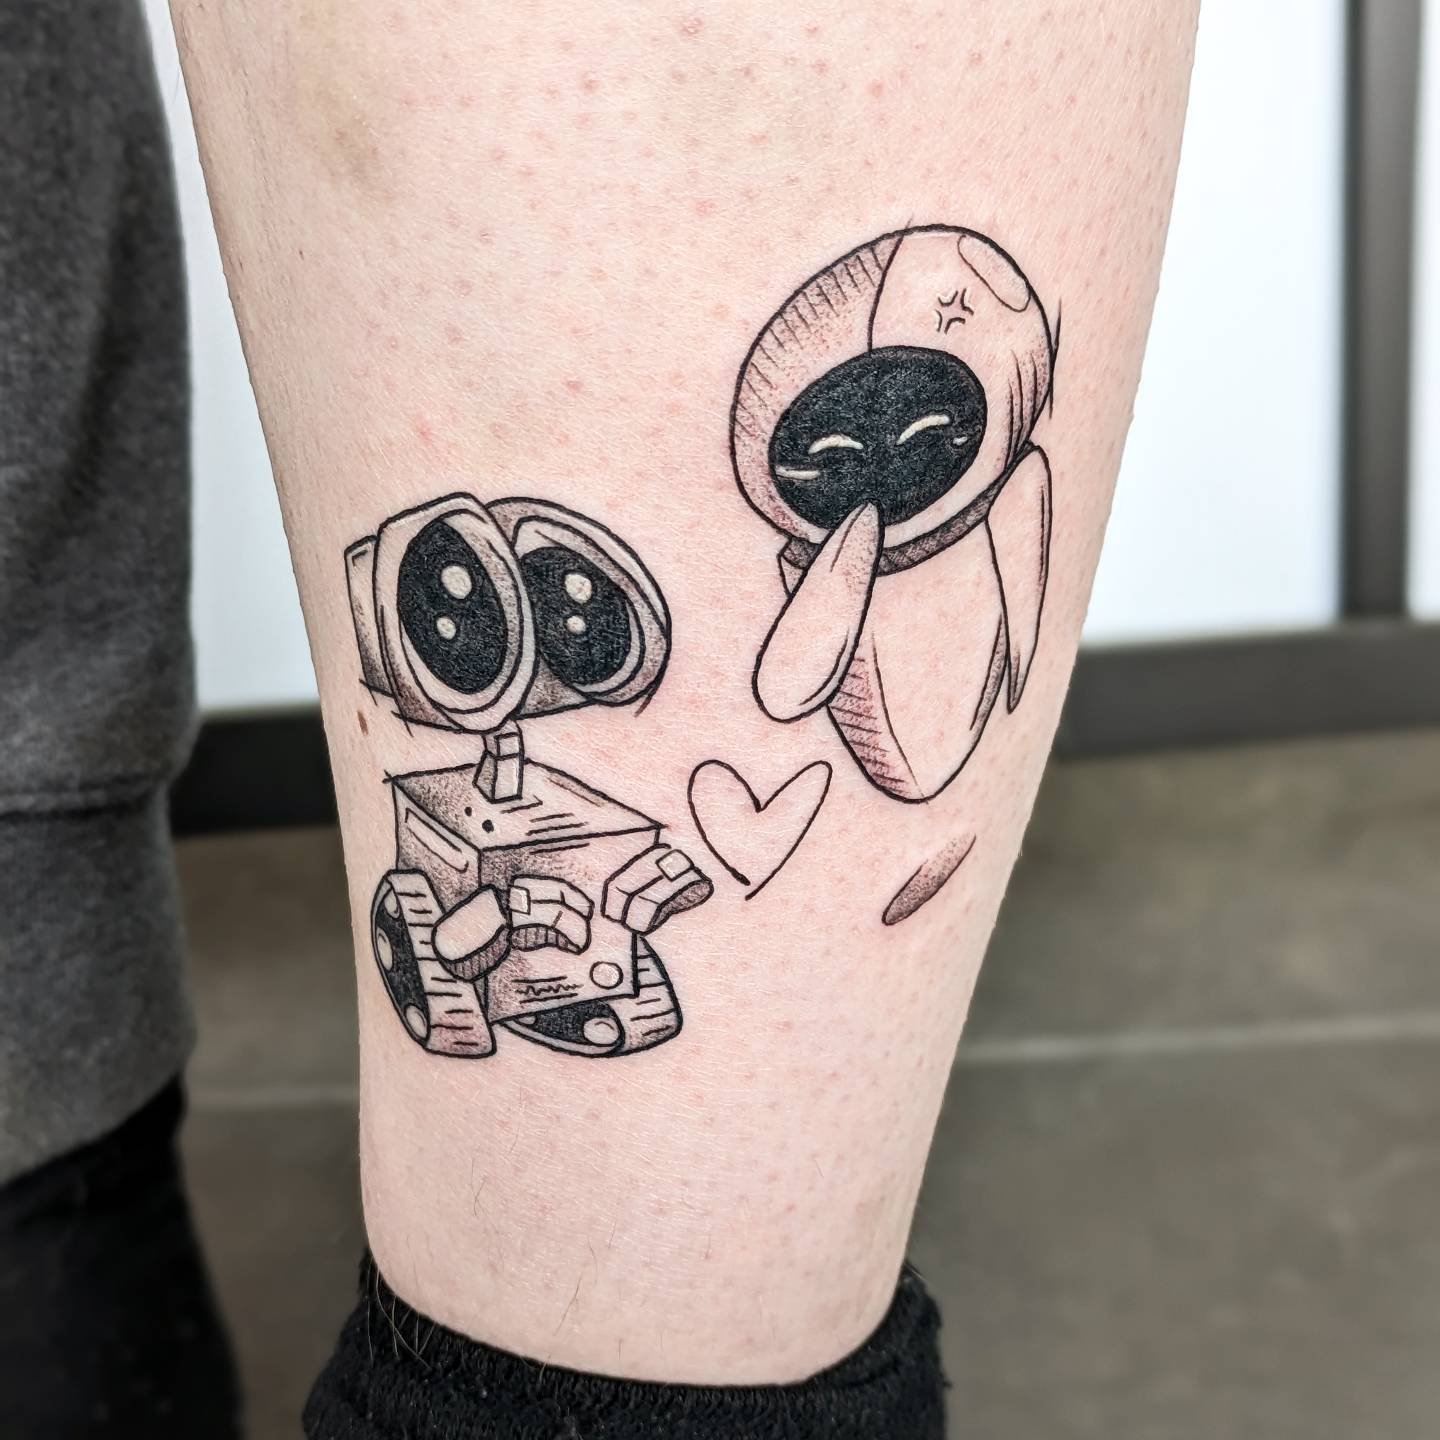 Wall-E and Eve made for Harriet this afternoon. 
Thanks so much pal!

&bull;&bull;&bull;&bull;&bull;&bull;&bull;&bull;&bull;&bull;&bull;&bull;&bull;&bull;&bull;&bull;&bull;&bull;&bull;&bull;&bull;&bull;&bull;&bull;

#tattoomanchester #manchestertatto